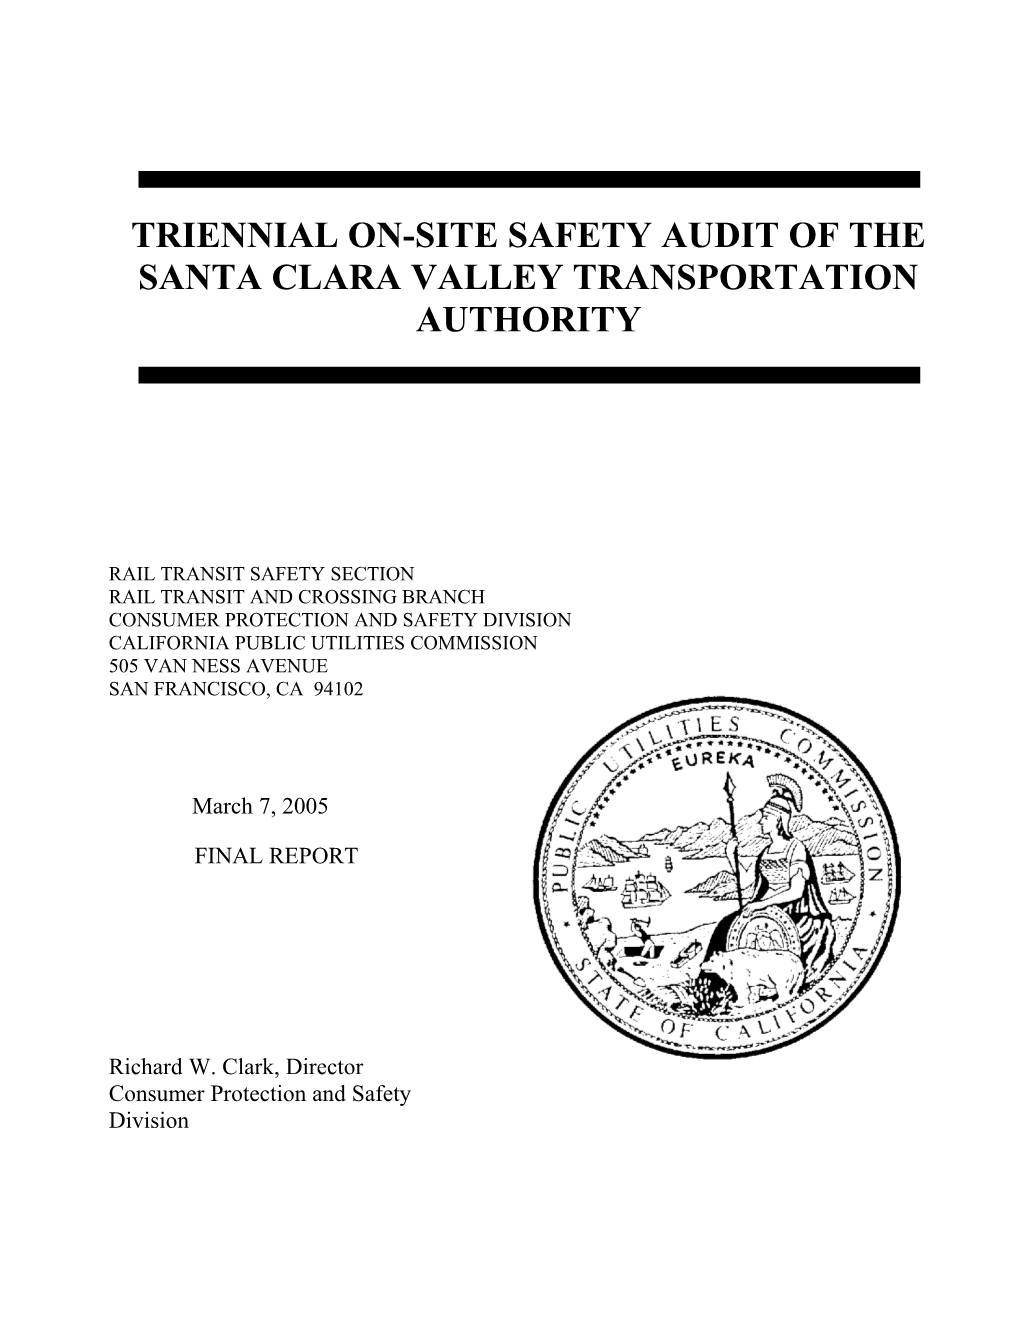 Triennial On-Site Safety Audit of the Santa Clara Valley Transportation Authority